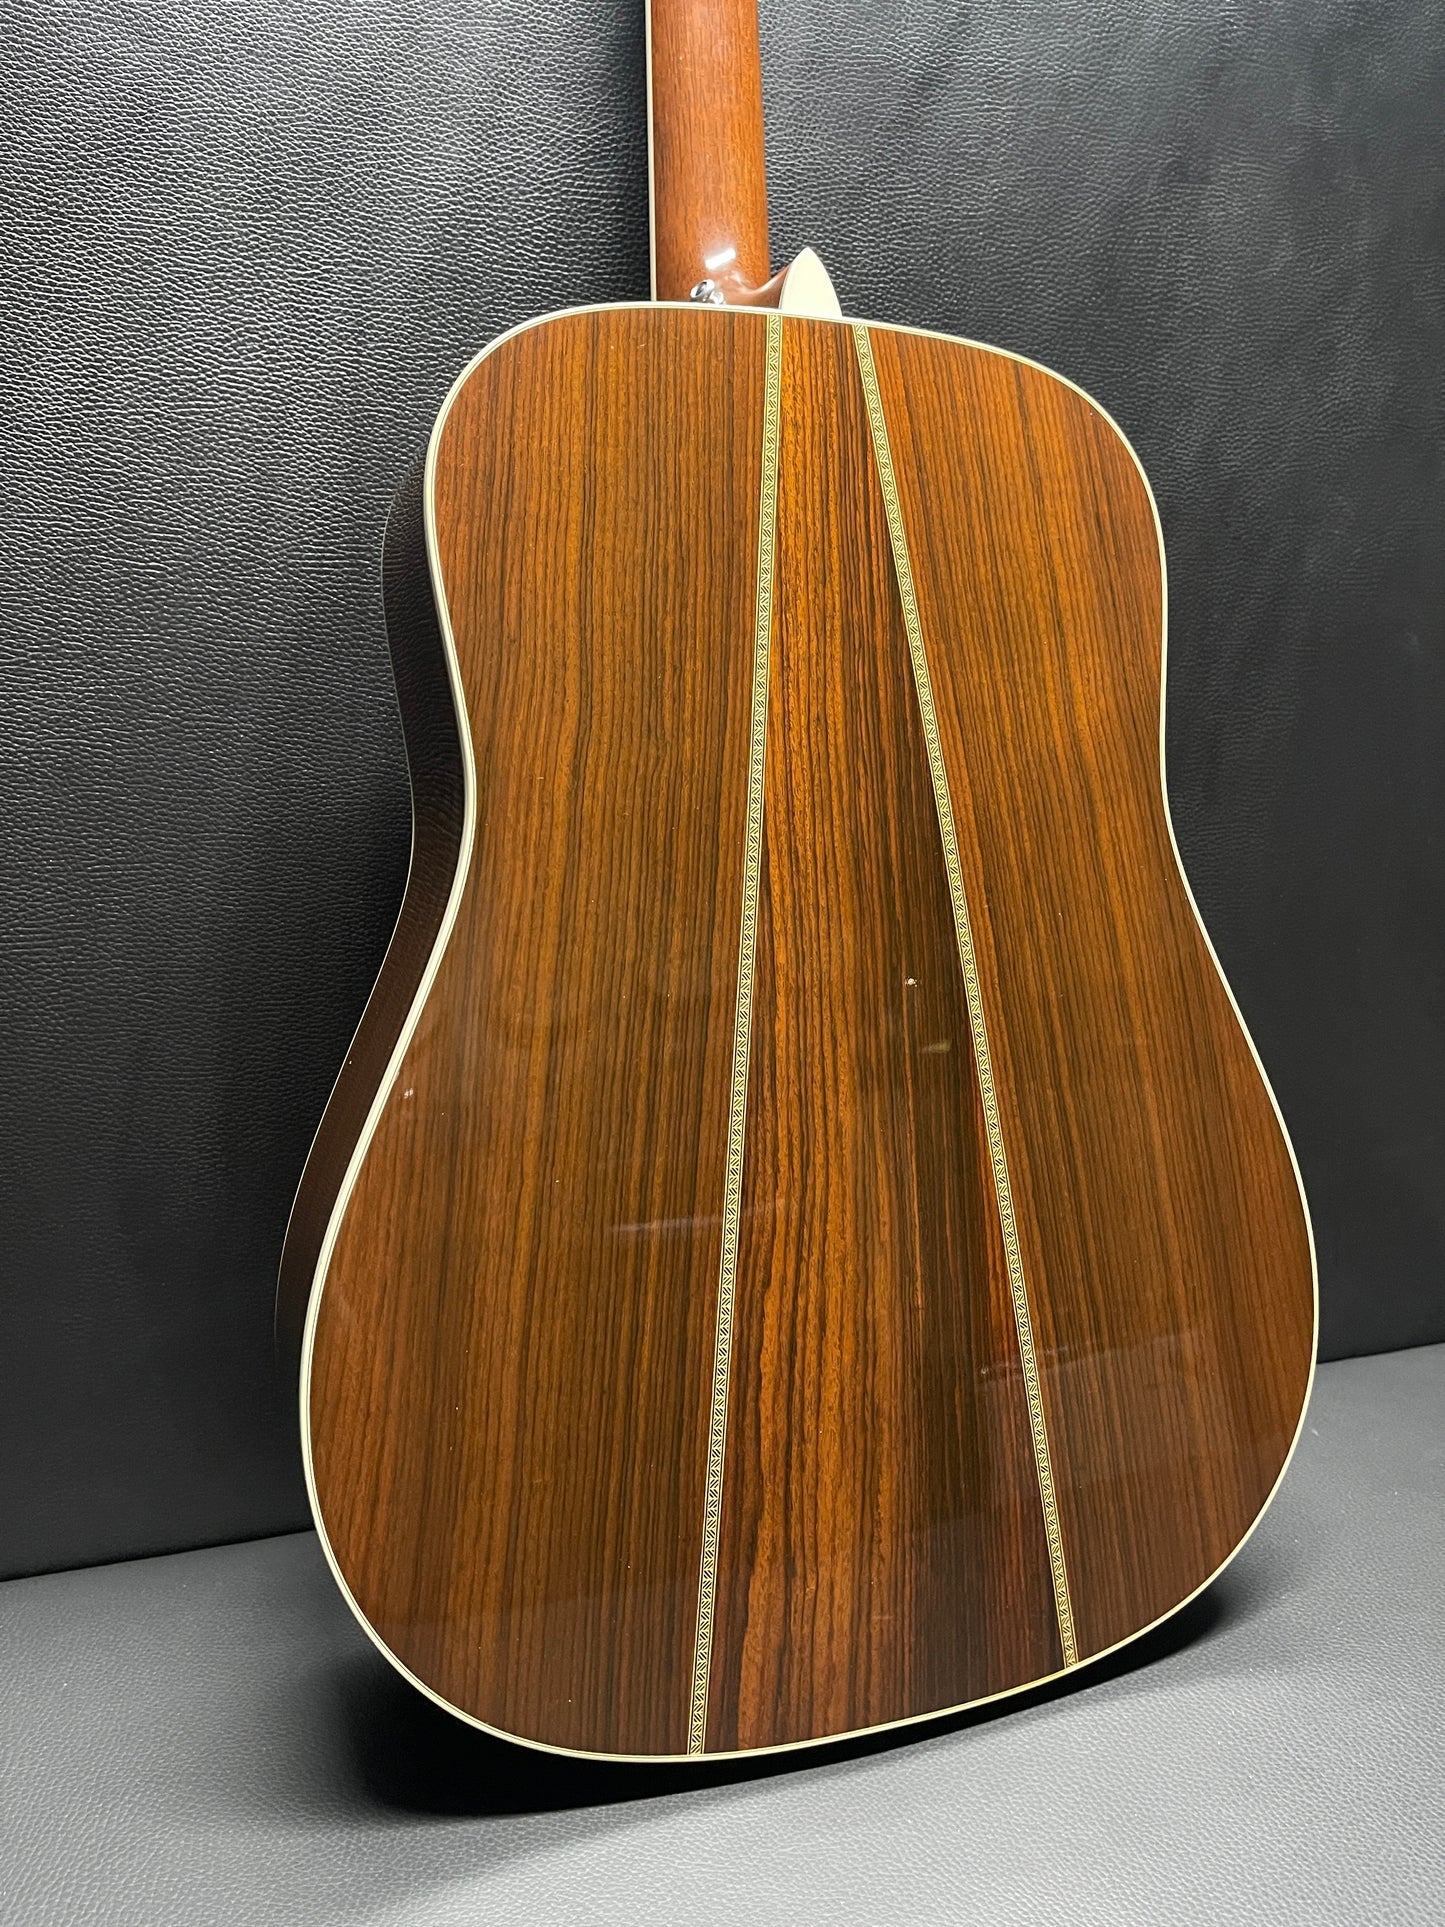 Martin HD35 2005 (PRE-OWNED)